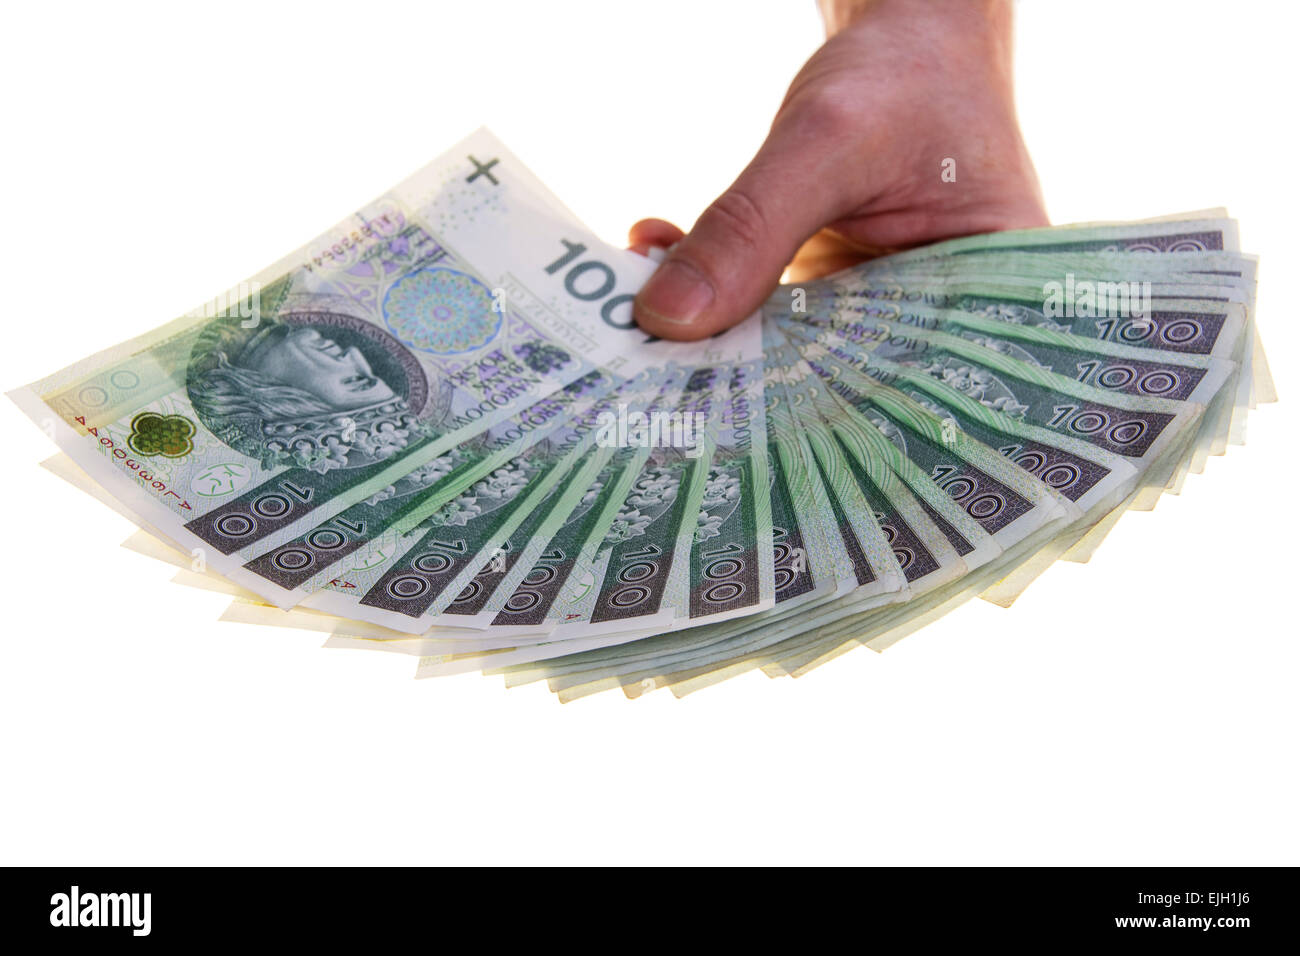 Polish currency banknotes hundred zloty stacked in hand. Stock Photo